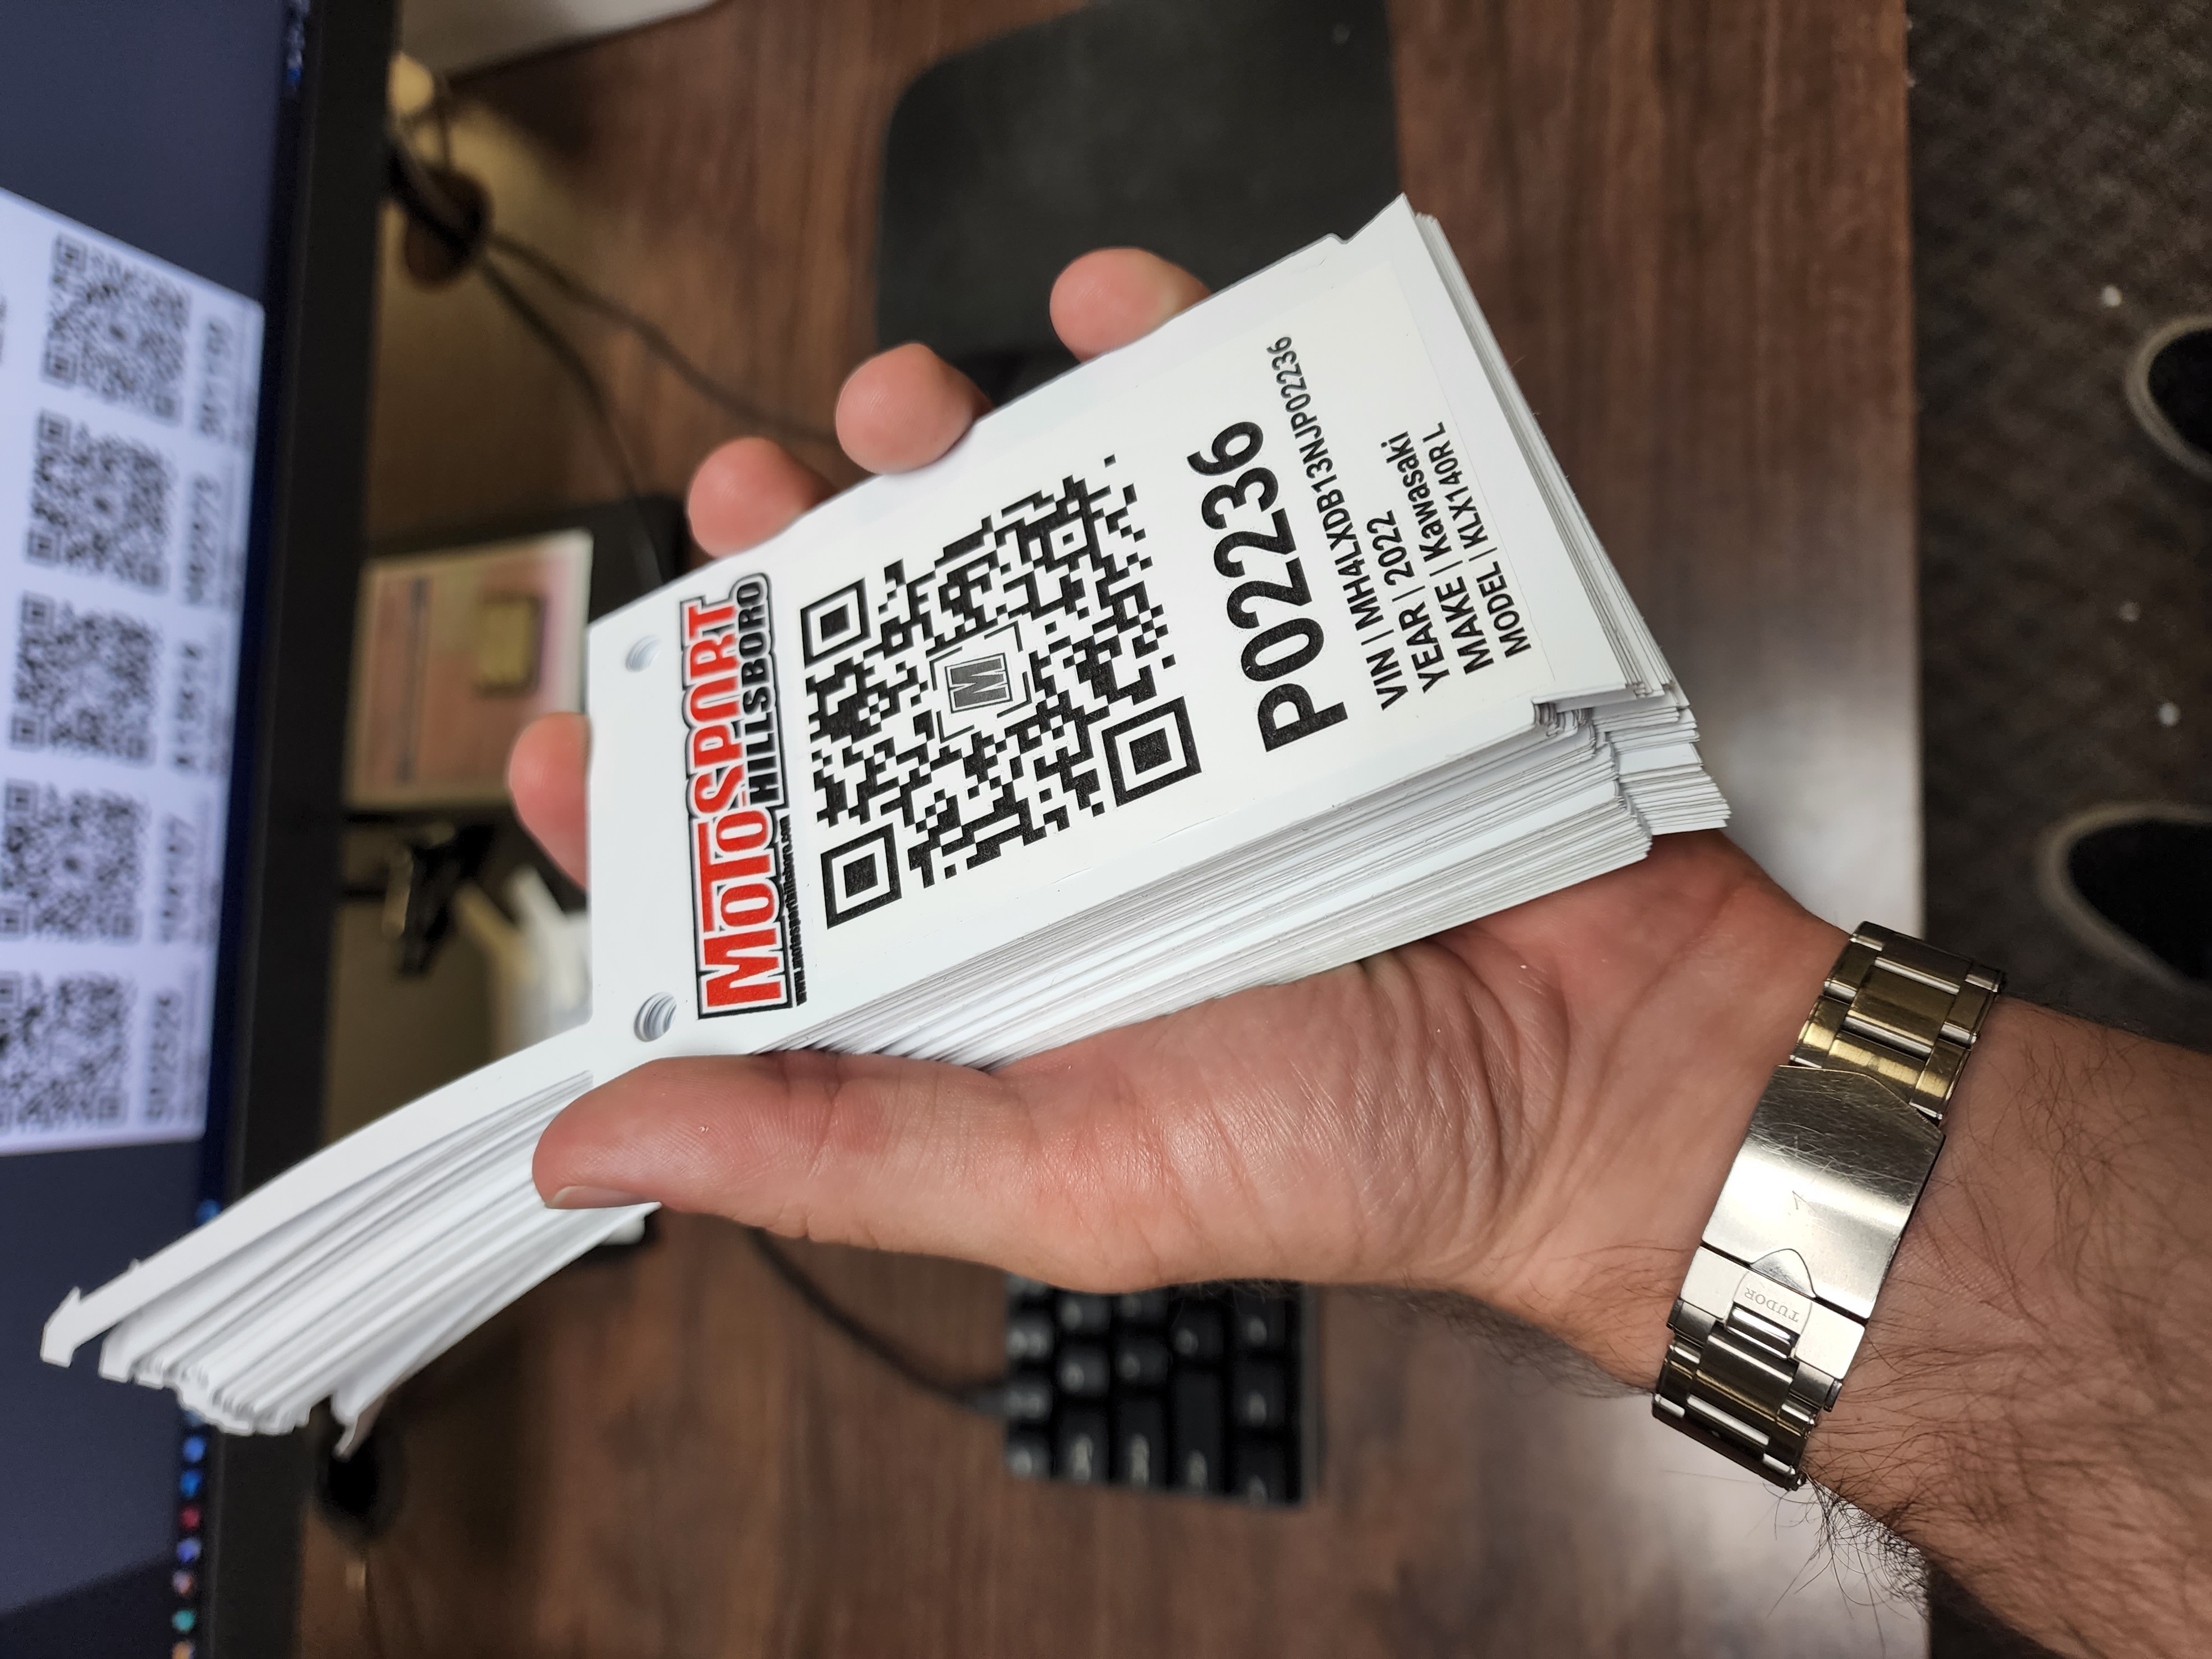 A large stack of qr codes that will be attached to various vehicles